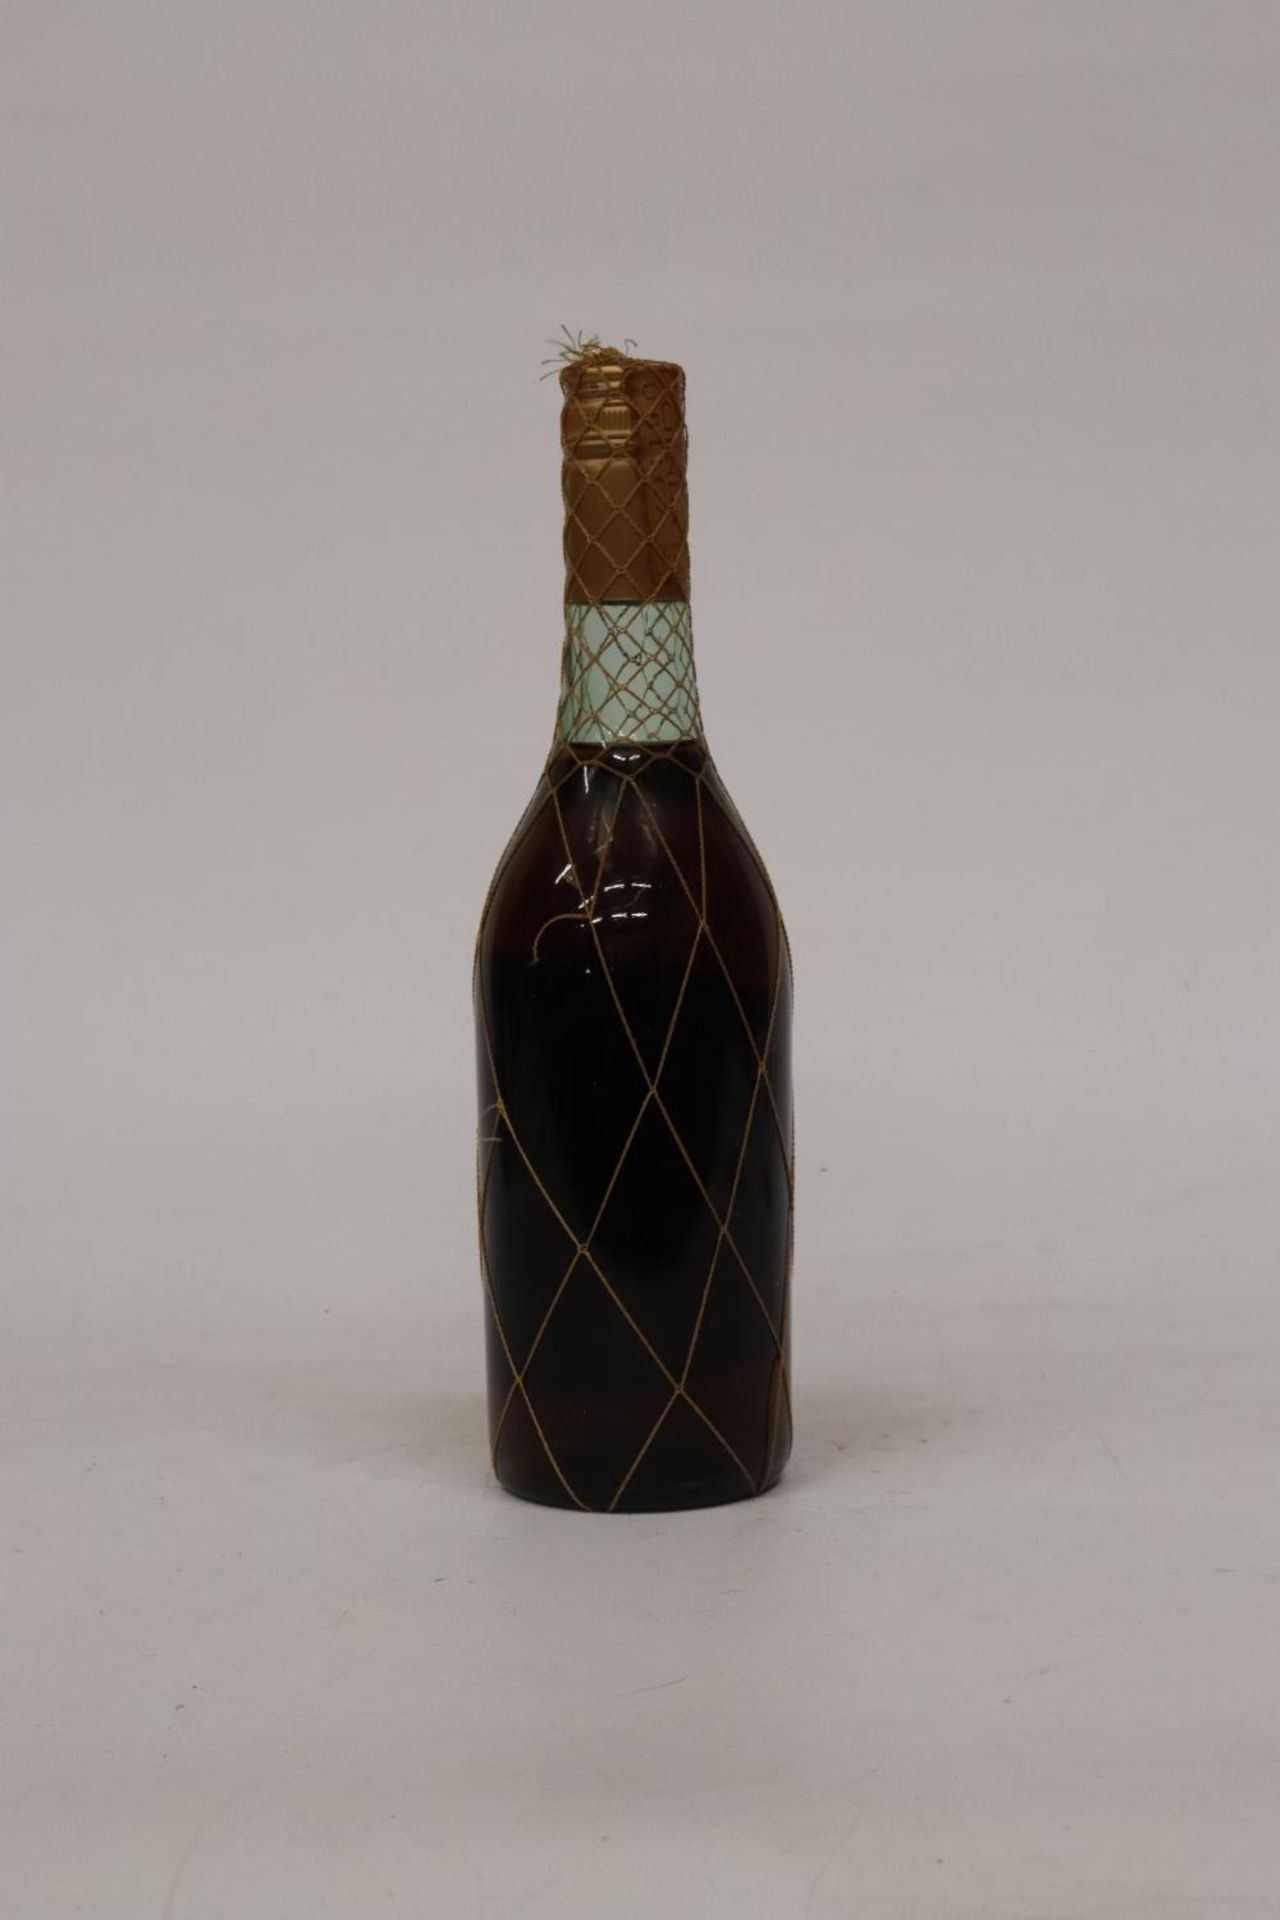 A 75 CL BOTTLE OF TERRY 1900 BRANDY - Image 2 of 2